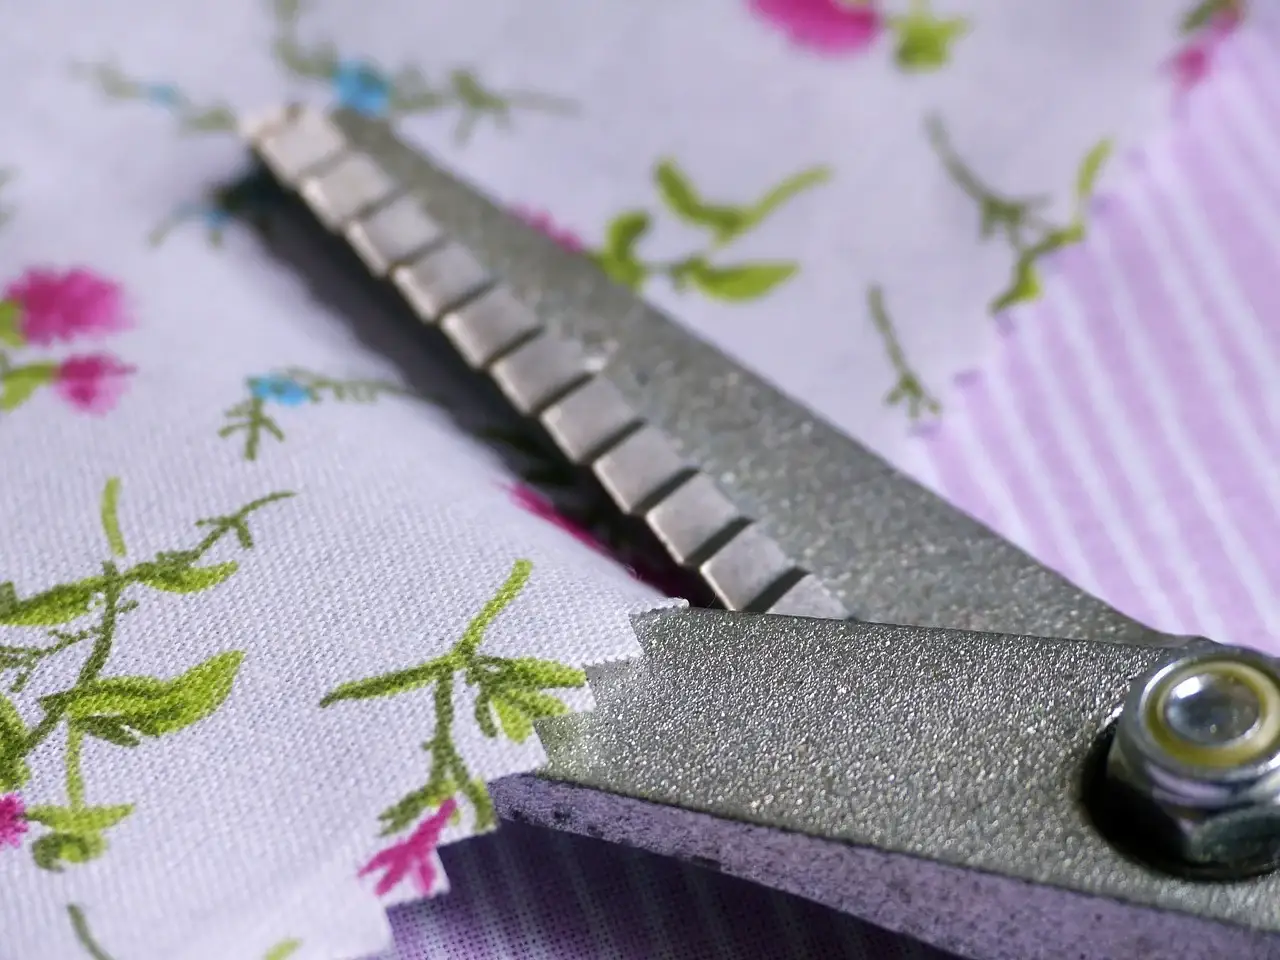 A pair of Pinking Shears on a piece of fabric.